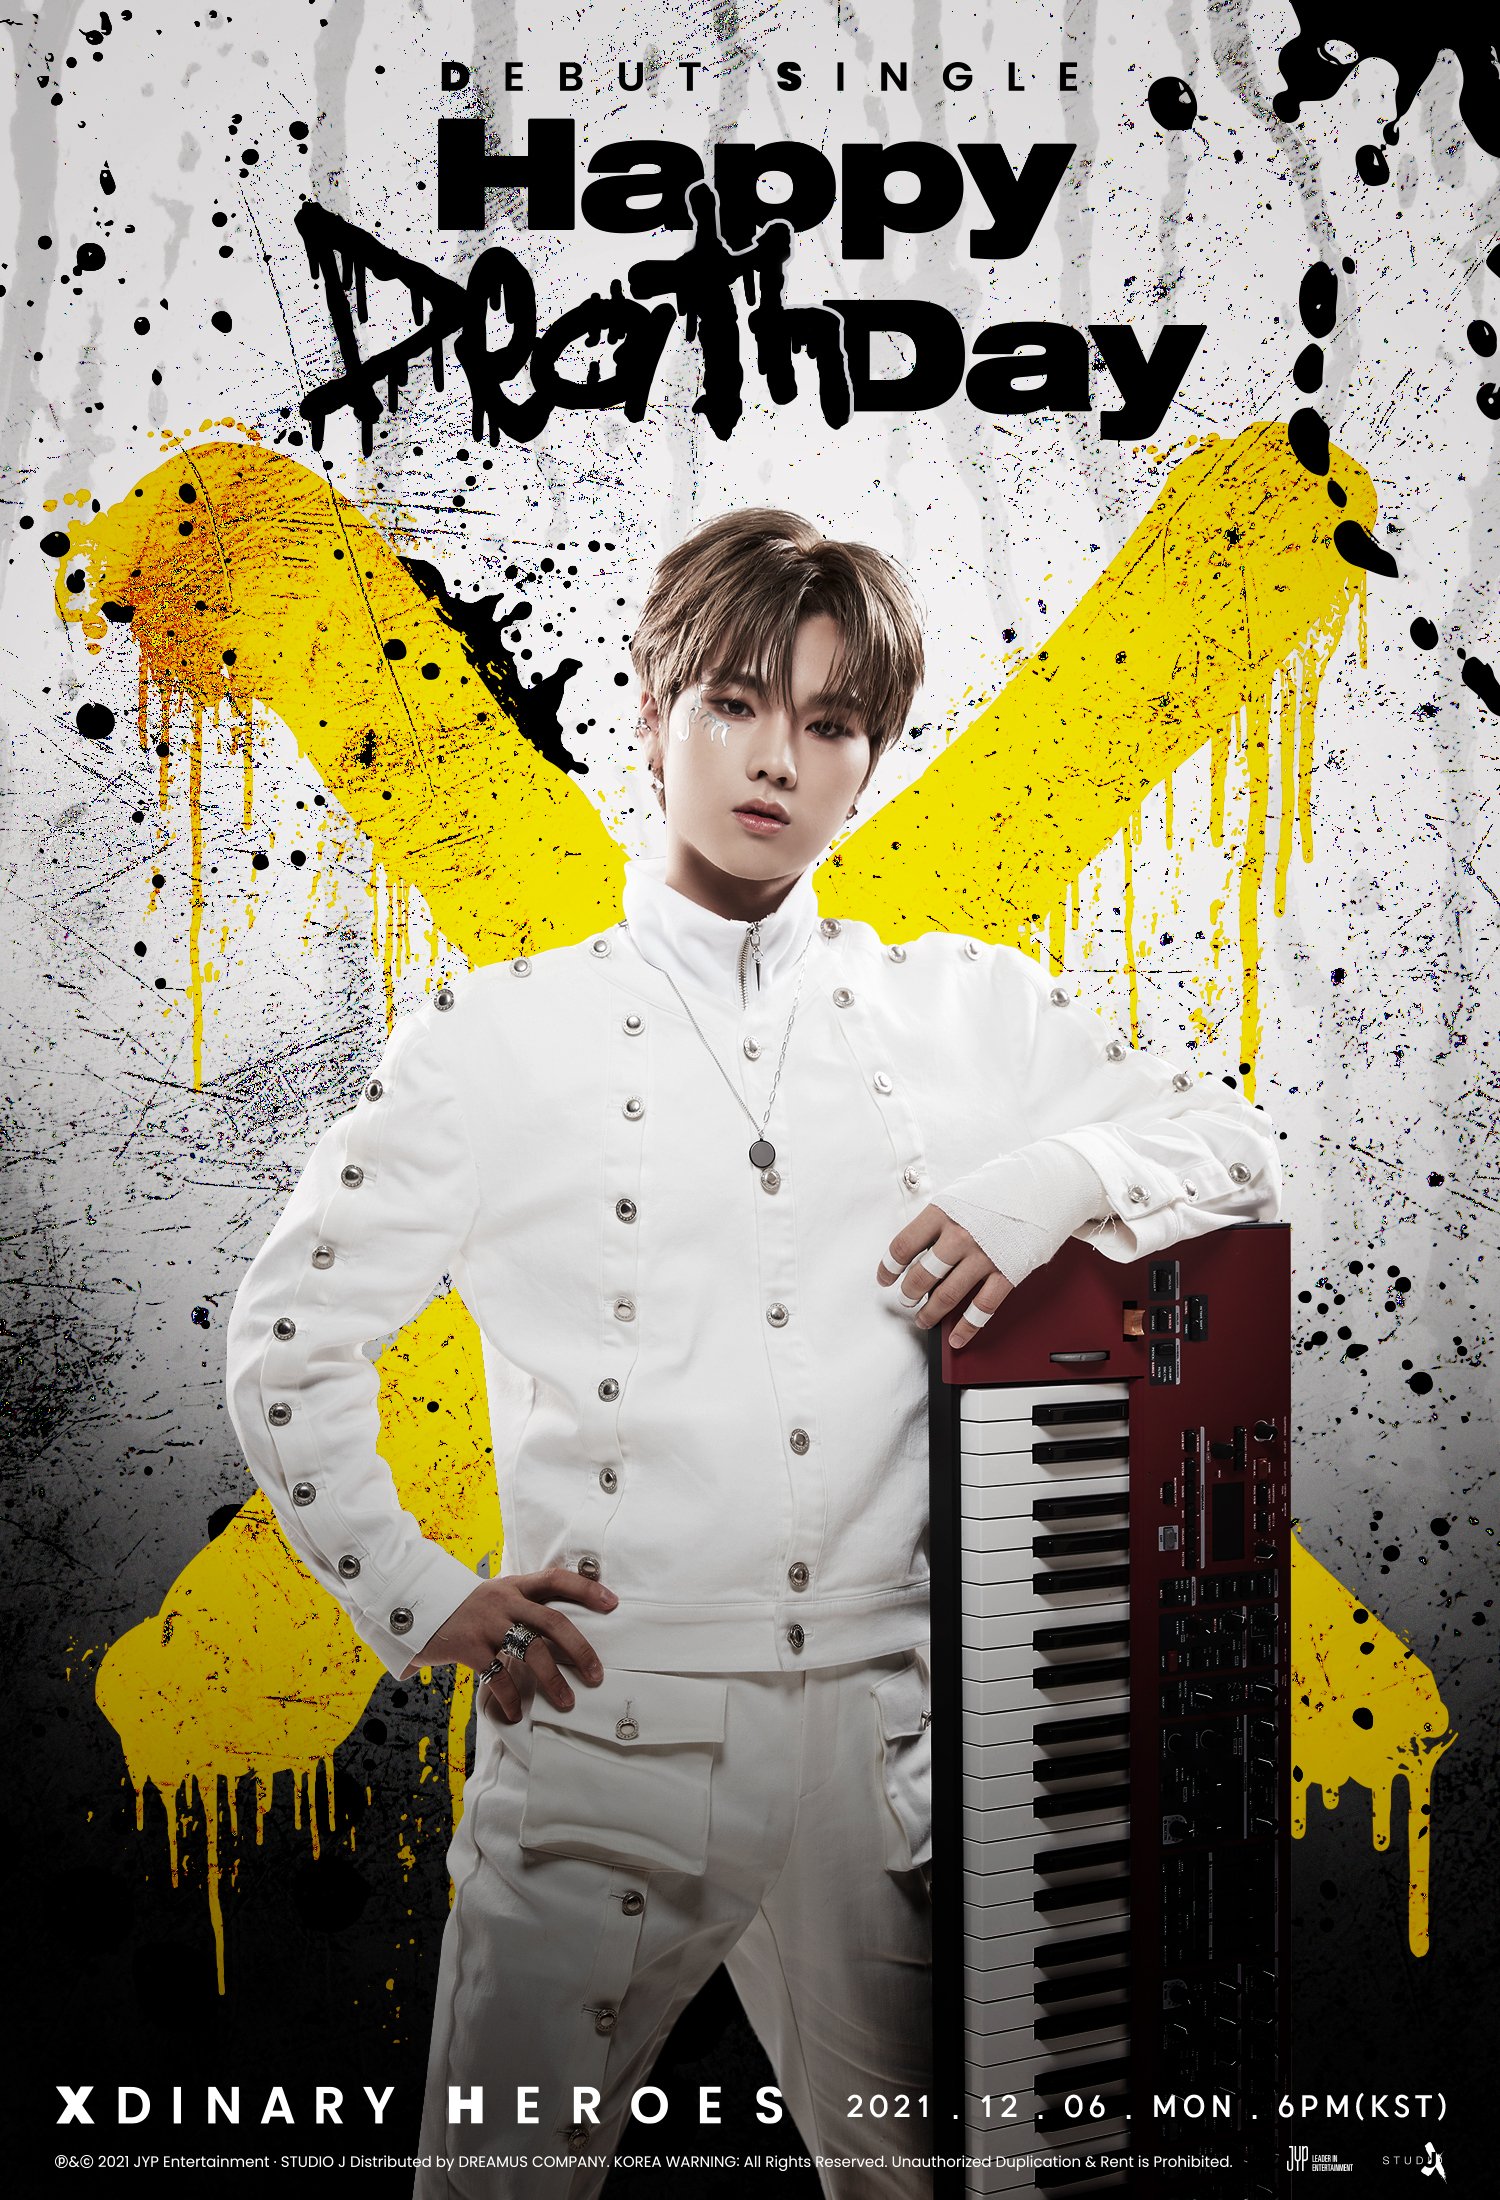 Xdinary Heroes Single 'Happy Death Day' (D DAY Teaser Image Ver.)